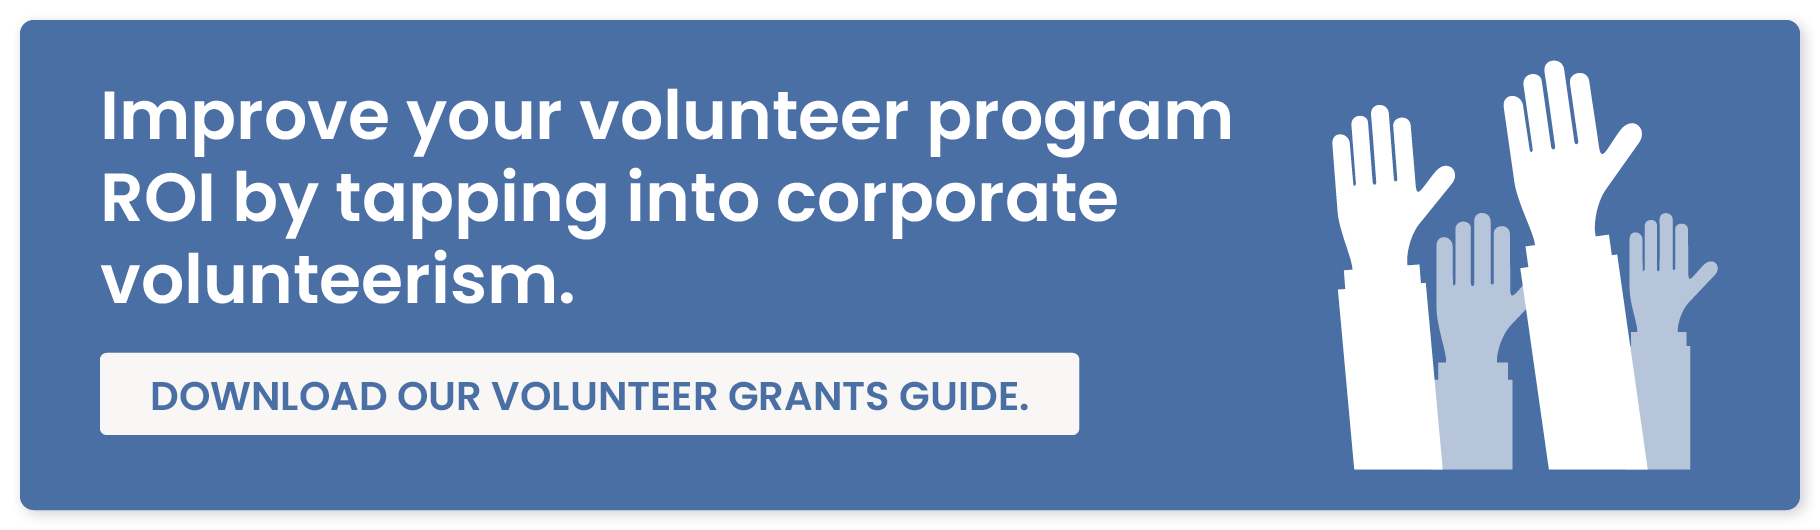 Improve your volunteer program ROI by tapping into corporate volunteerism.